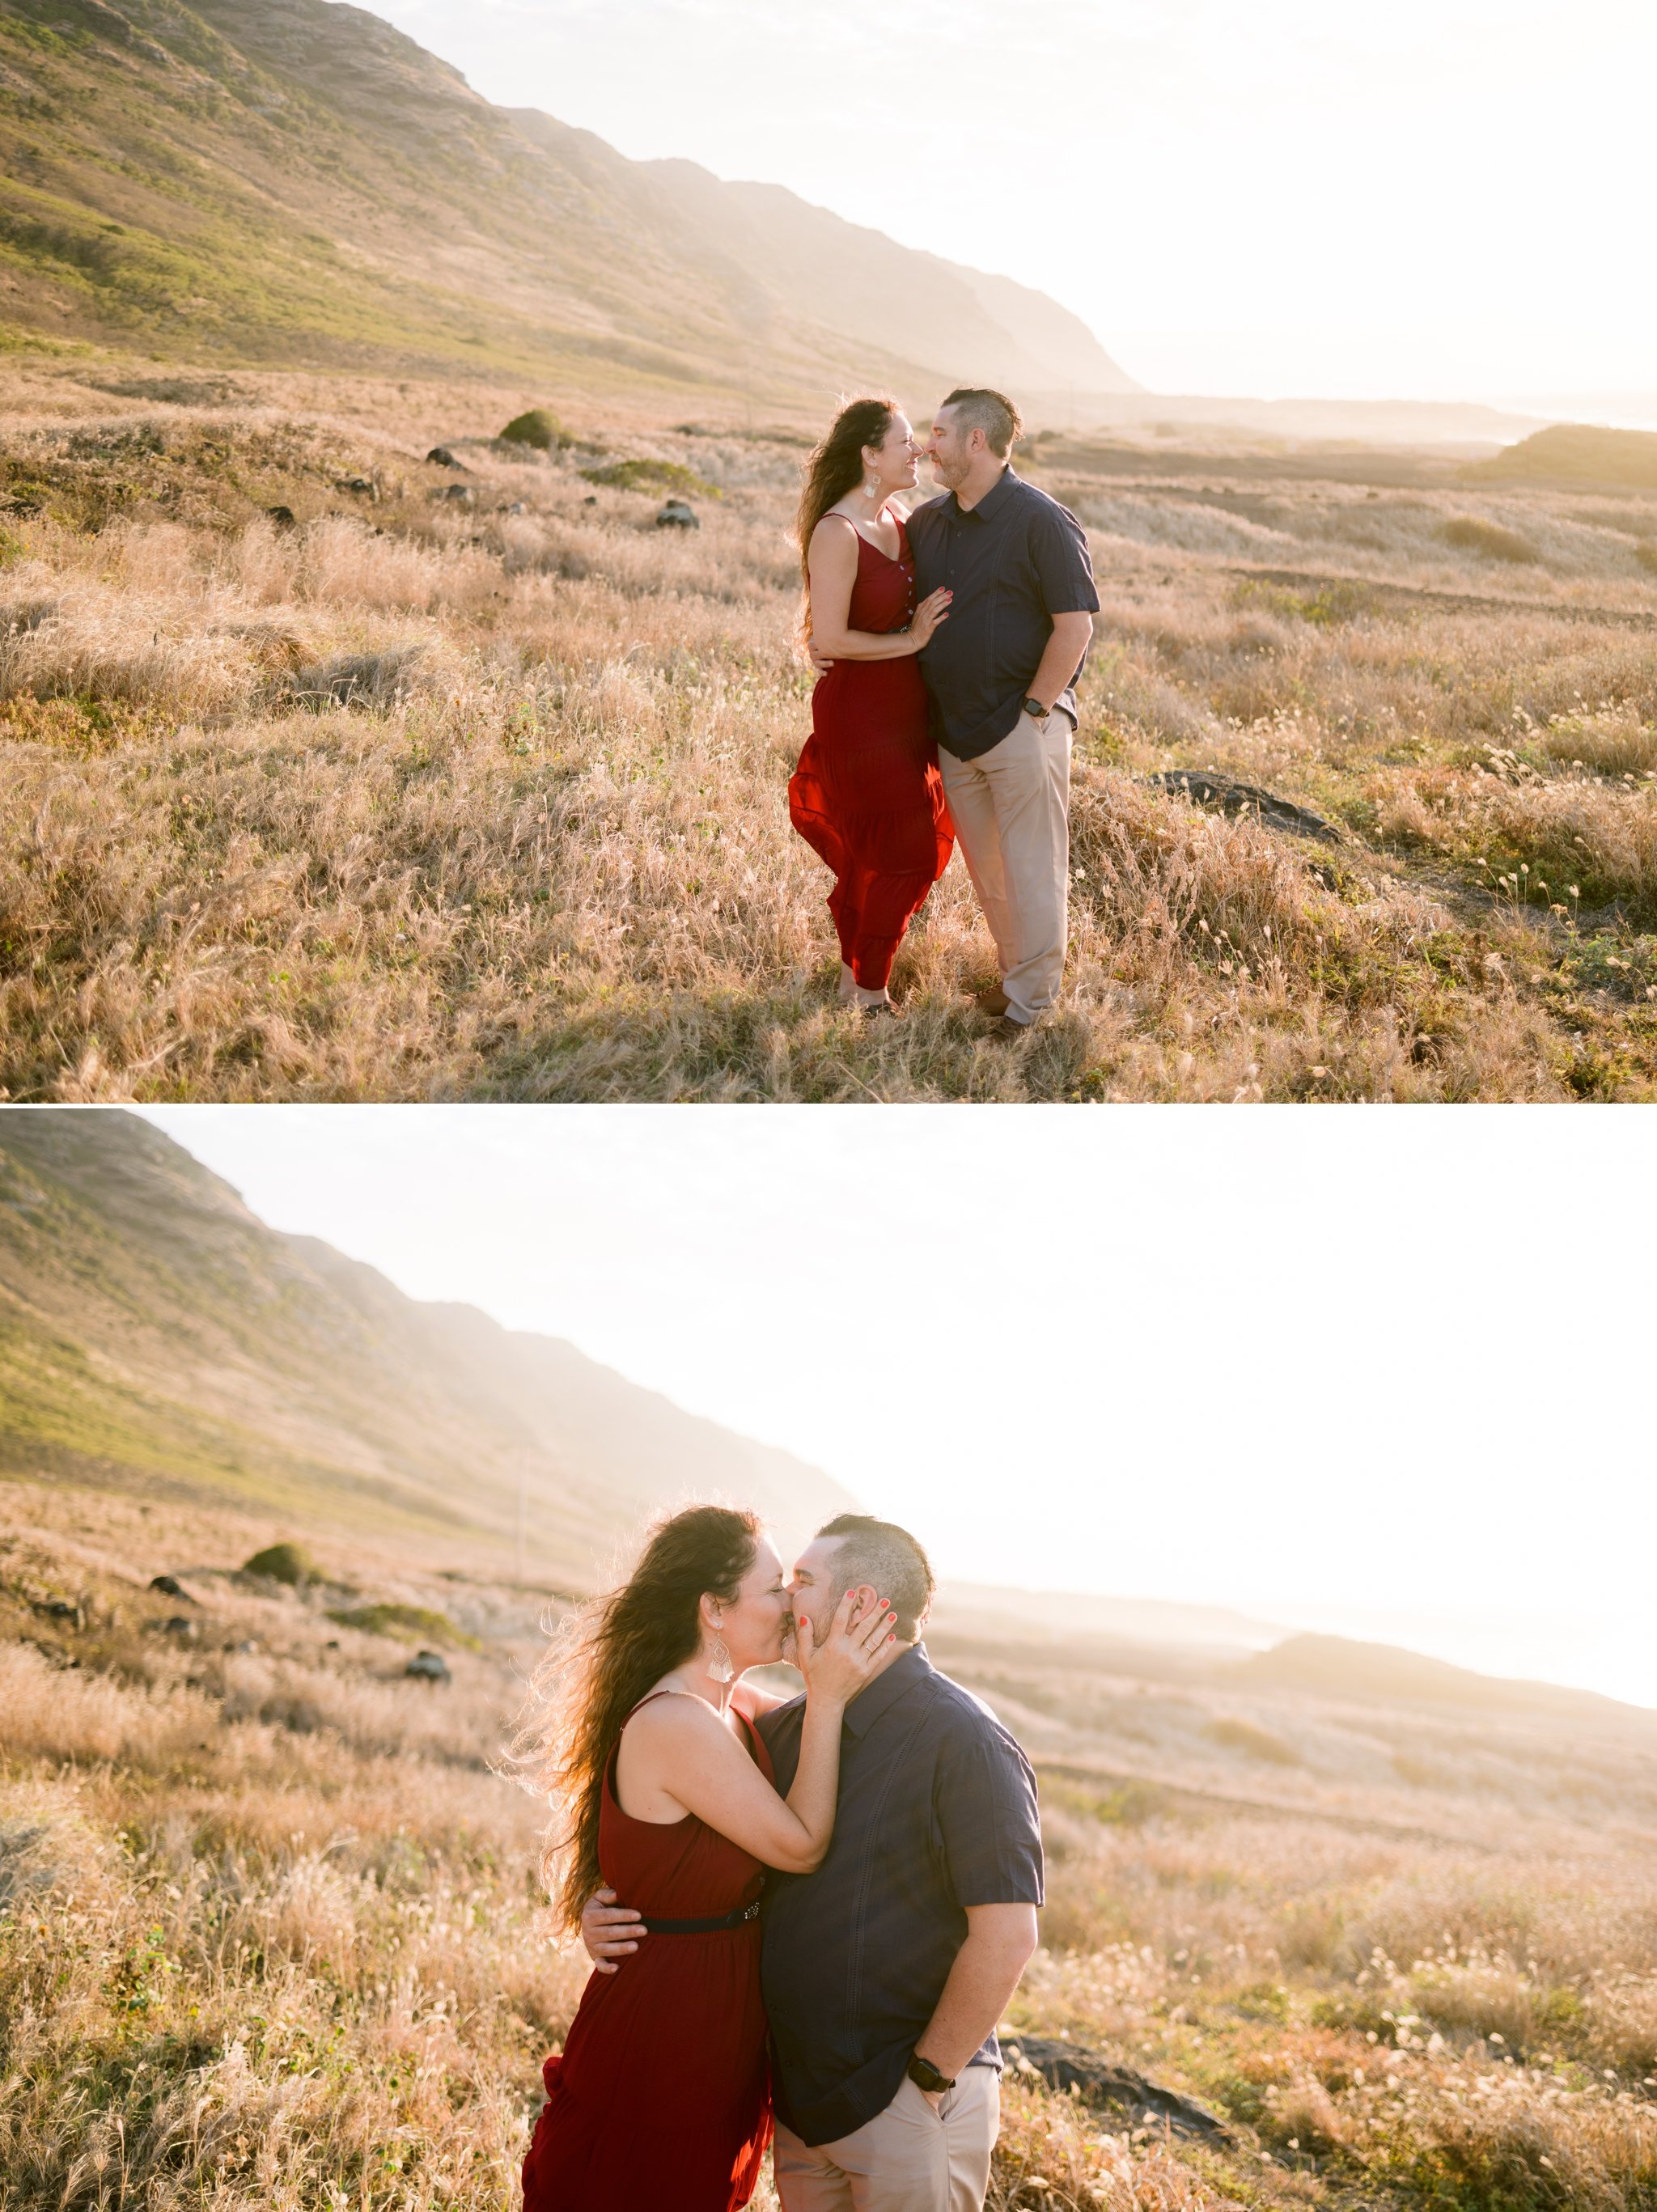 Sunset Family Photography Session on Oahu 